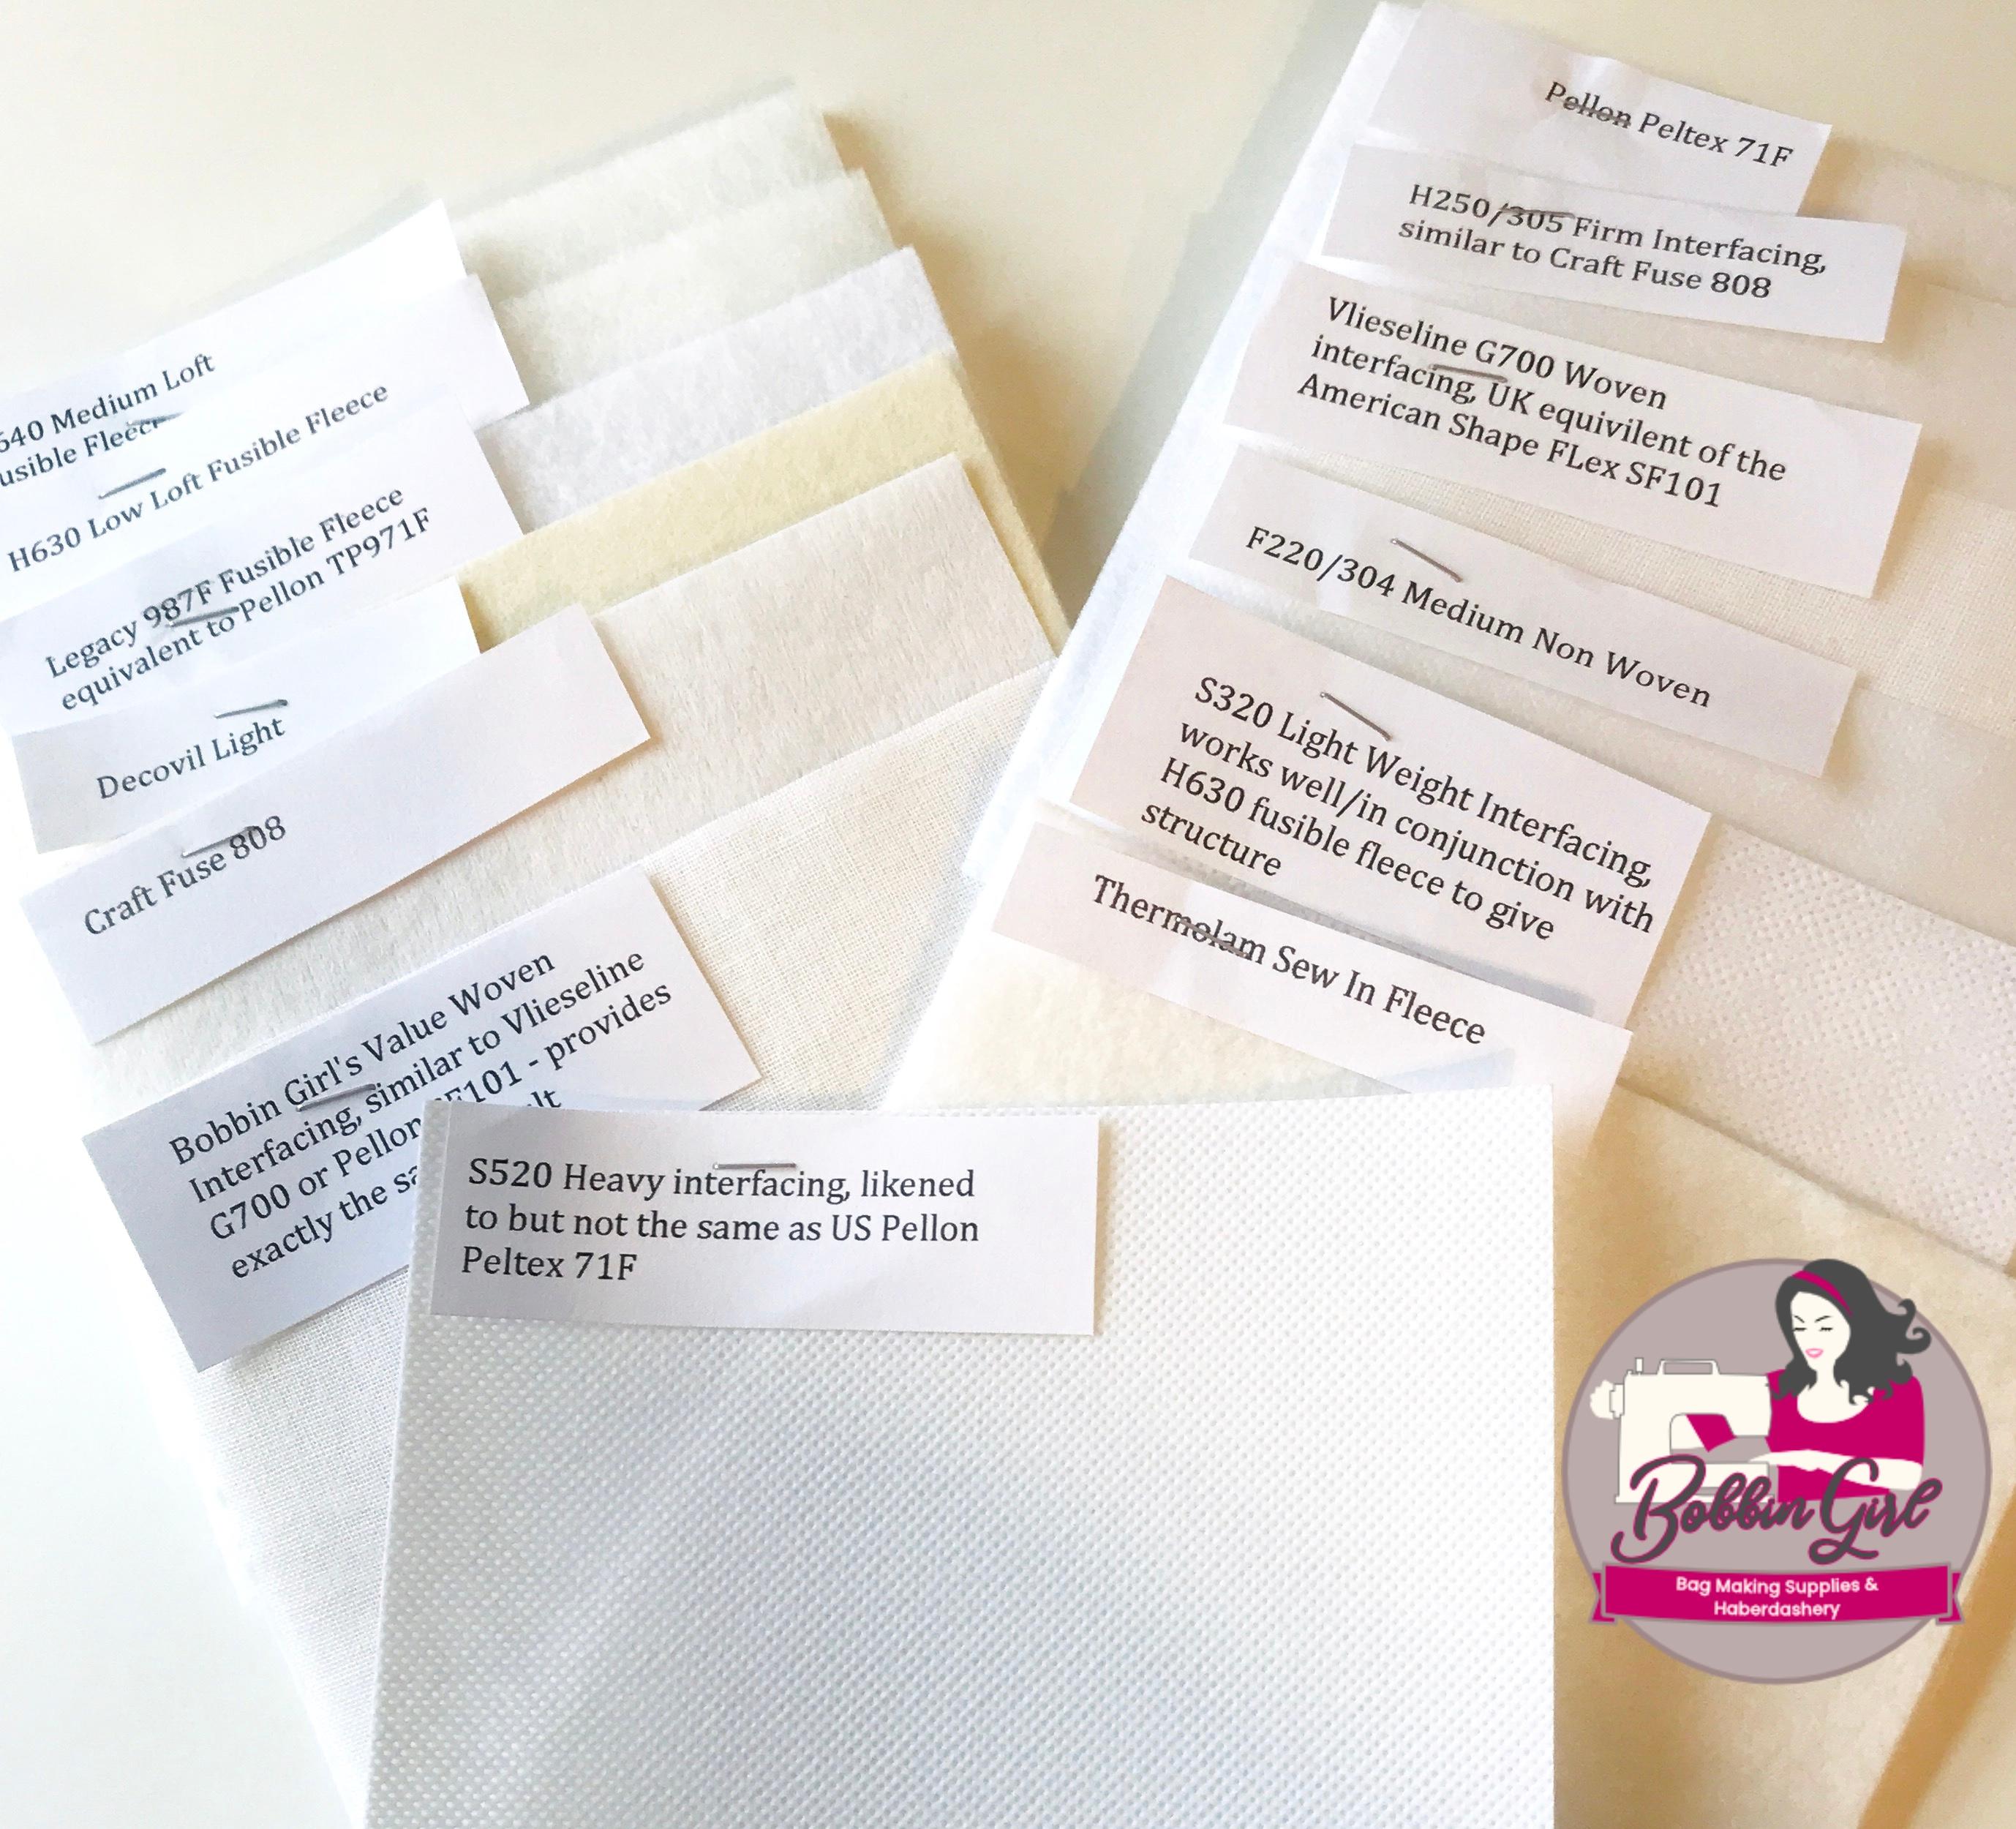 Bobbin Girl's interfacing sample kit allows you to test all the interfacing products we sell